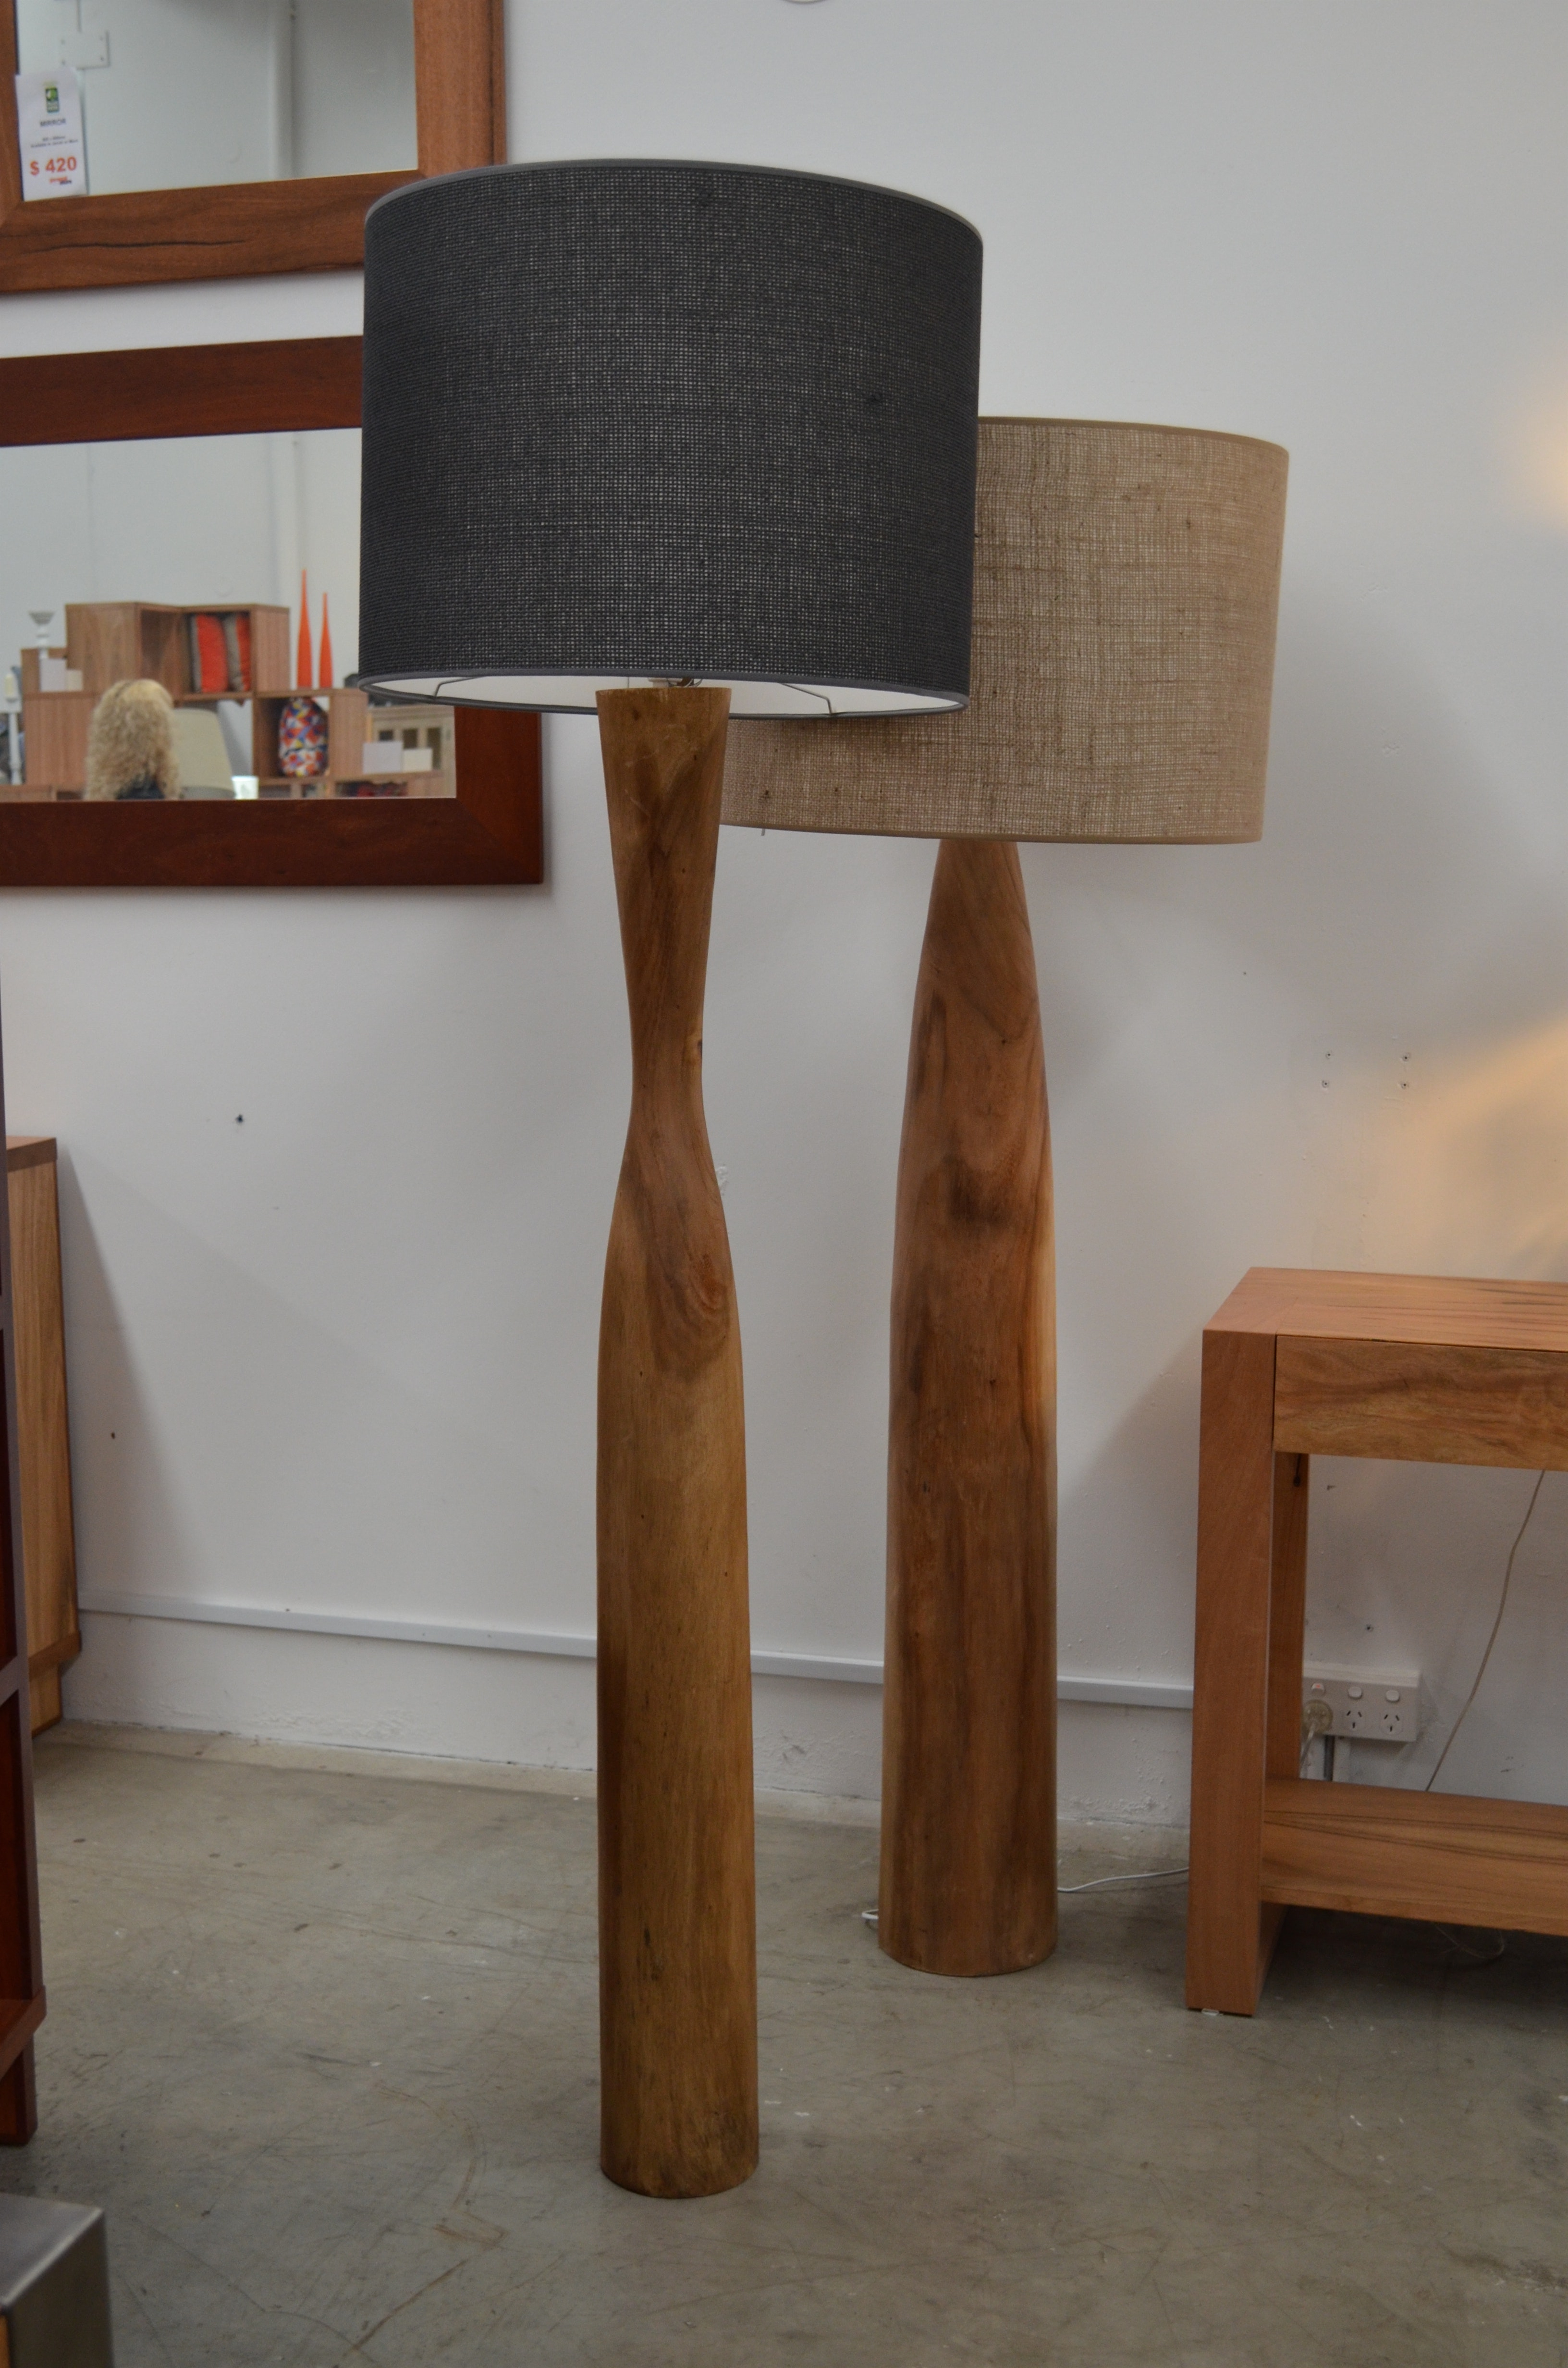 New Wooden Floor Lamp Uk Driftwood With Shade Rustic A pertaining to dimensions 3264 X 4928